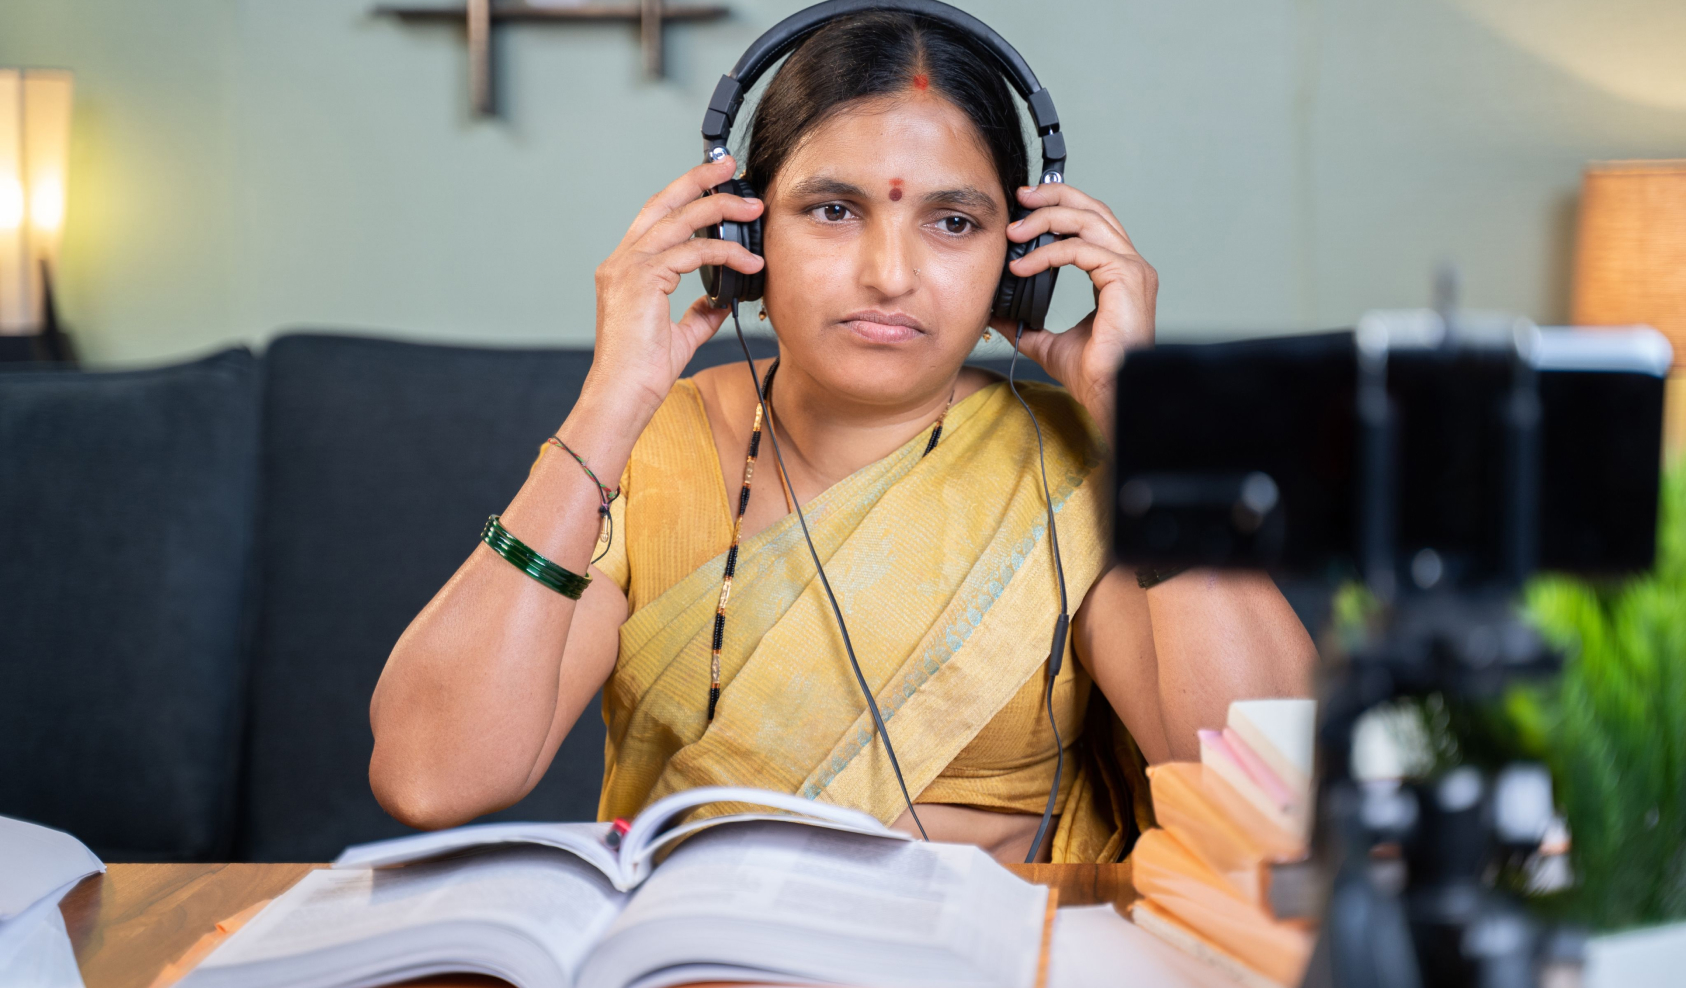 A woman sitting in front of a camera and some books puts a pair of headphones on